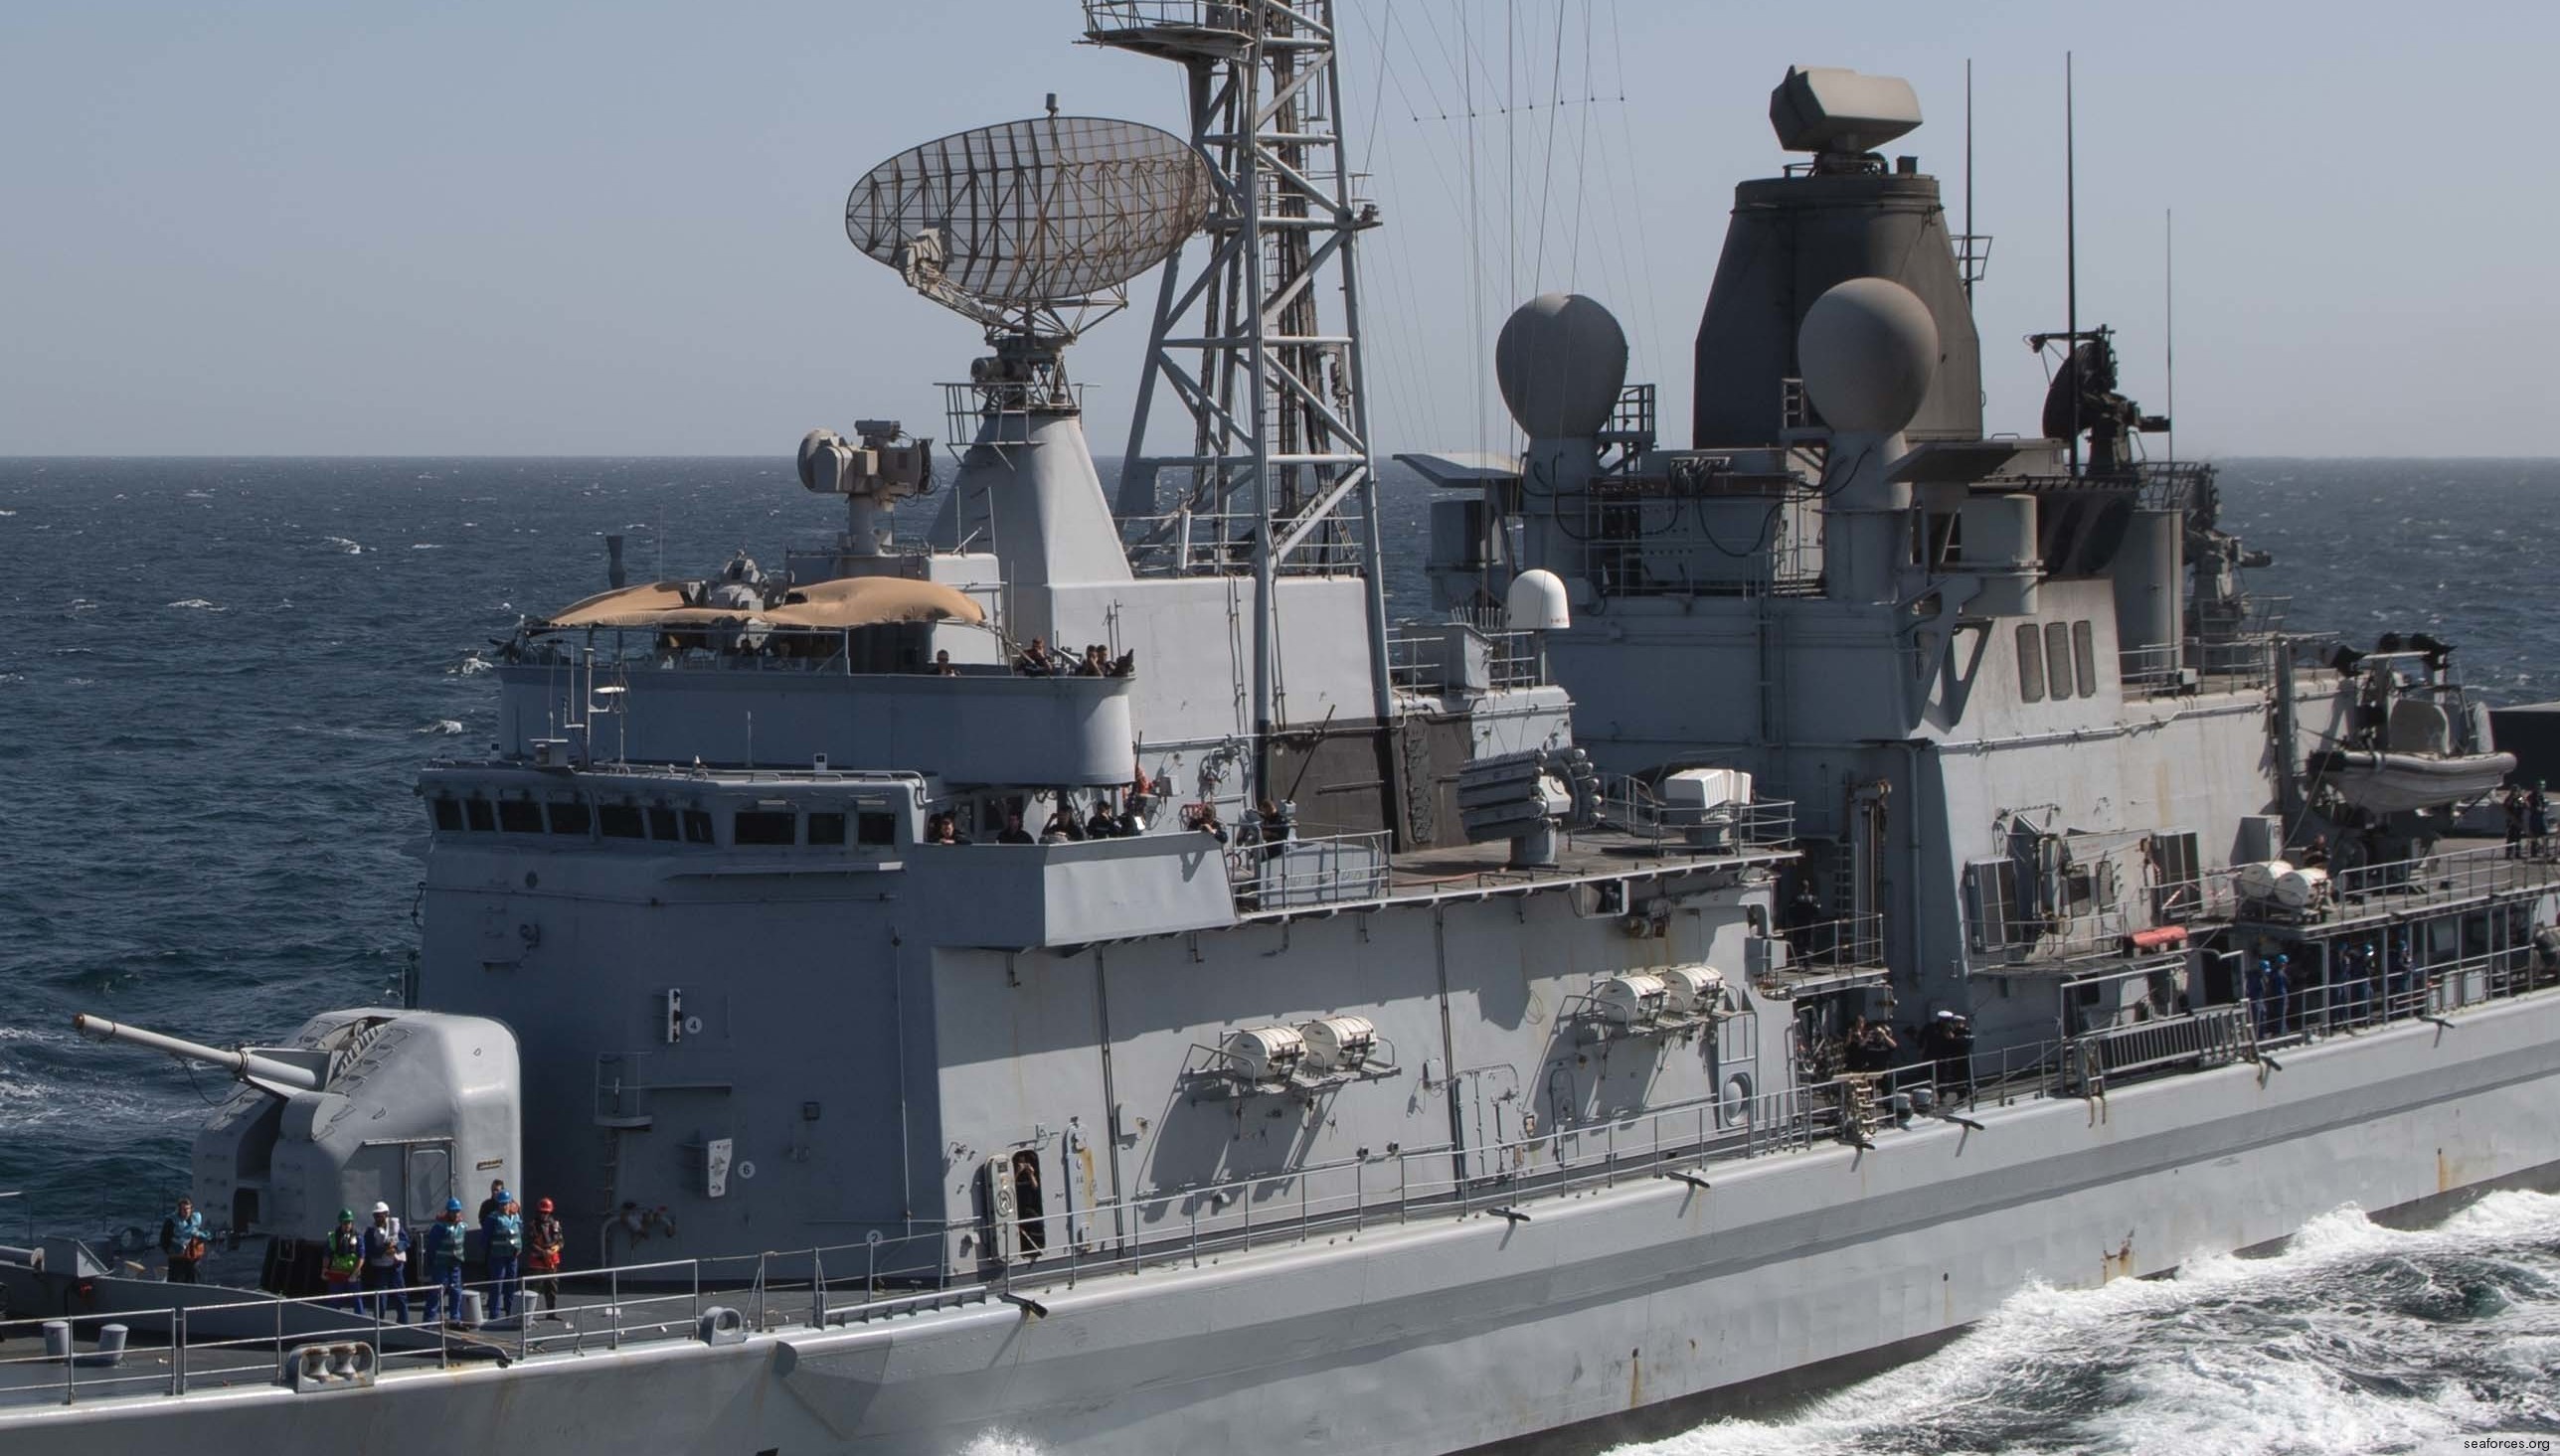 d-614 fs cassard f70aa class guided missile frigate ffgh ddg french navy marine nationale 21a armament